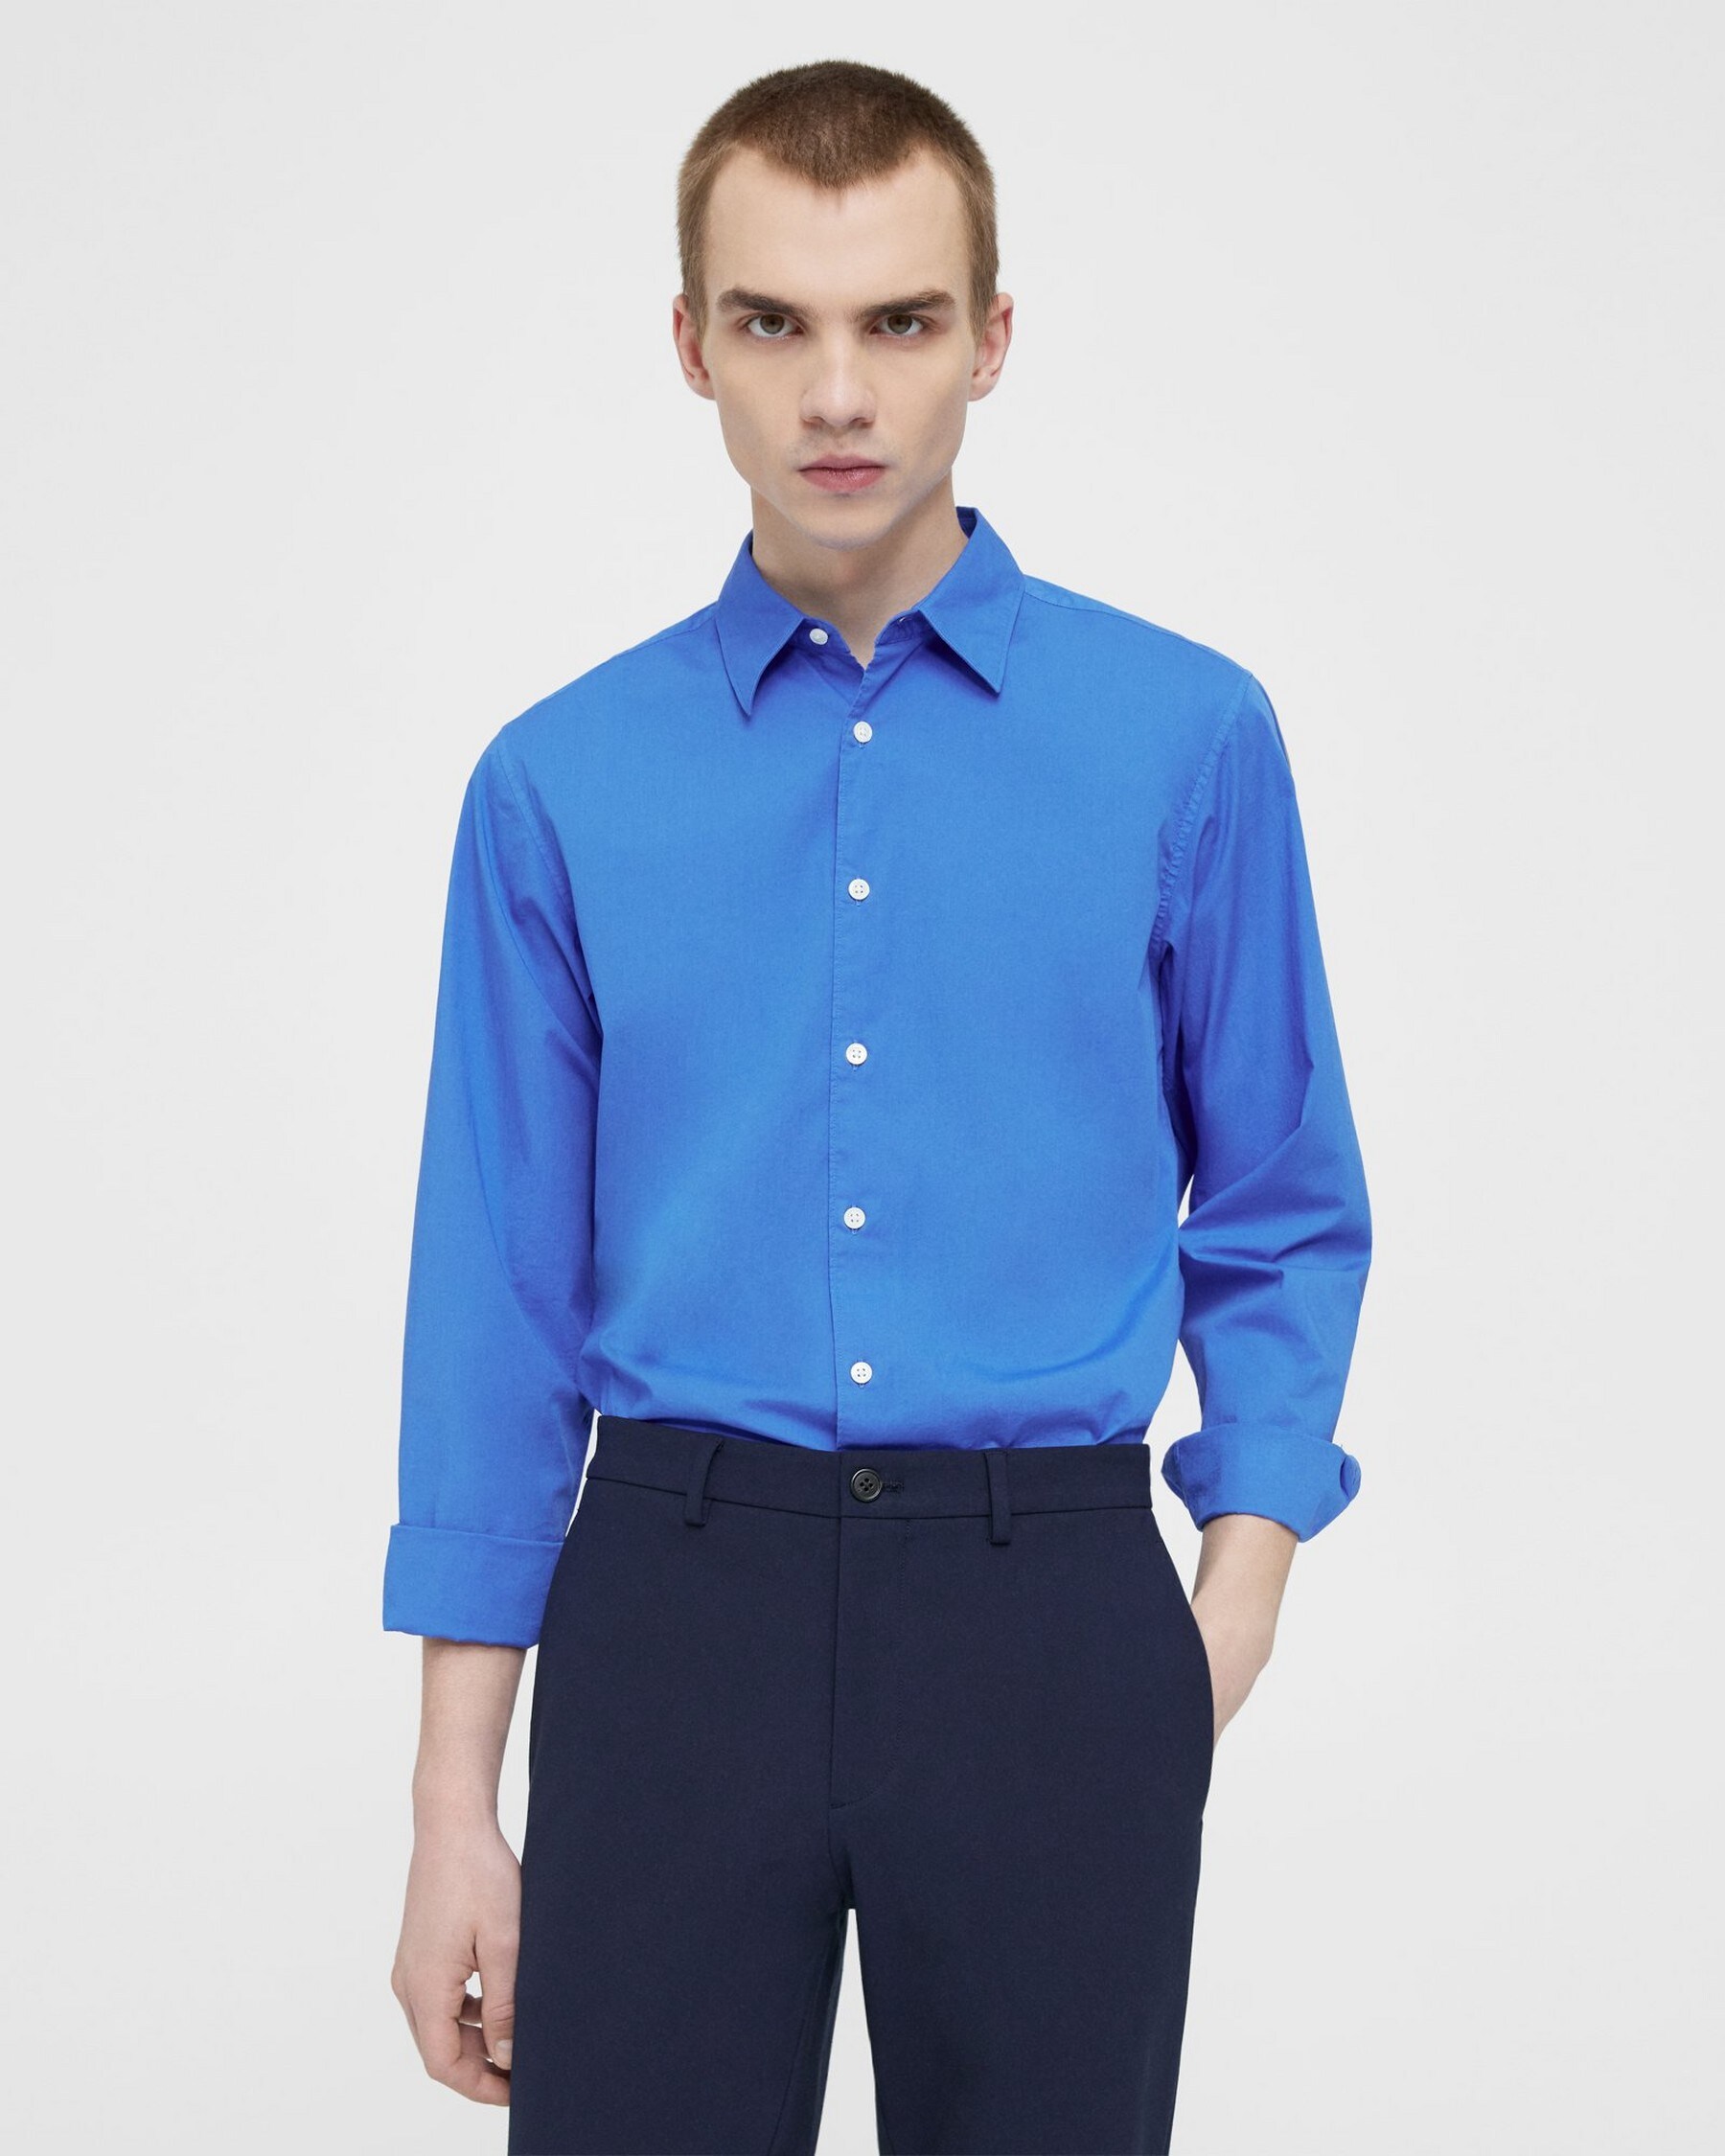 Theory Irving Shirt in Cotton